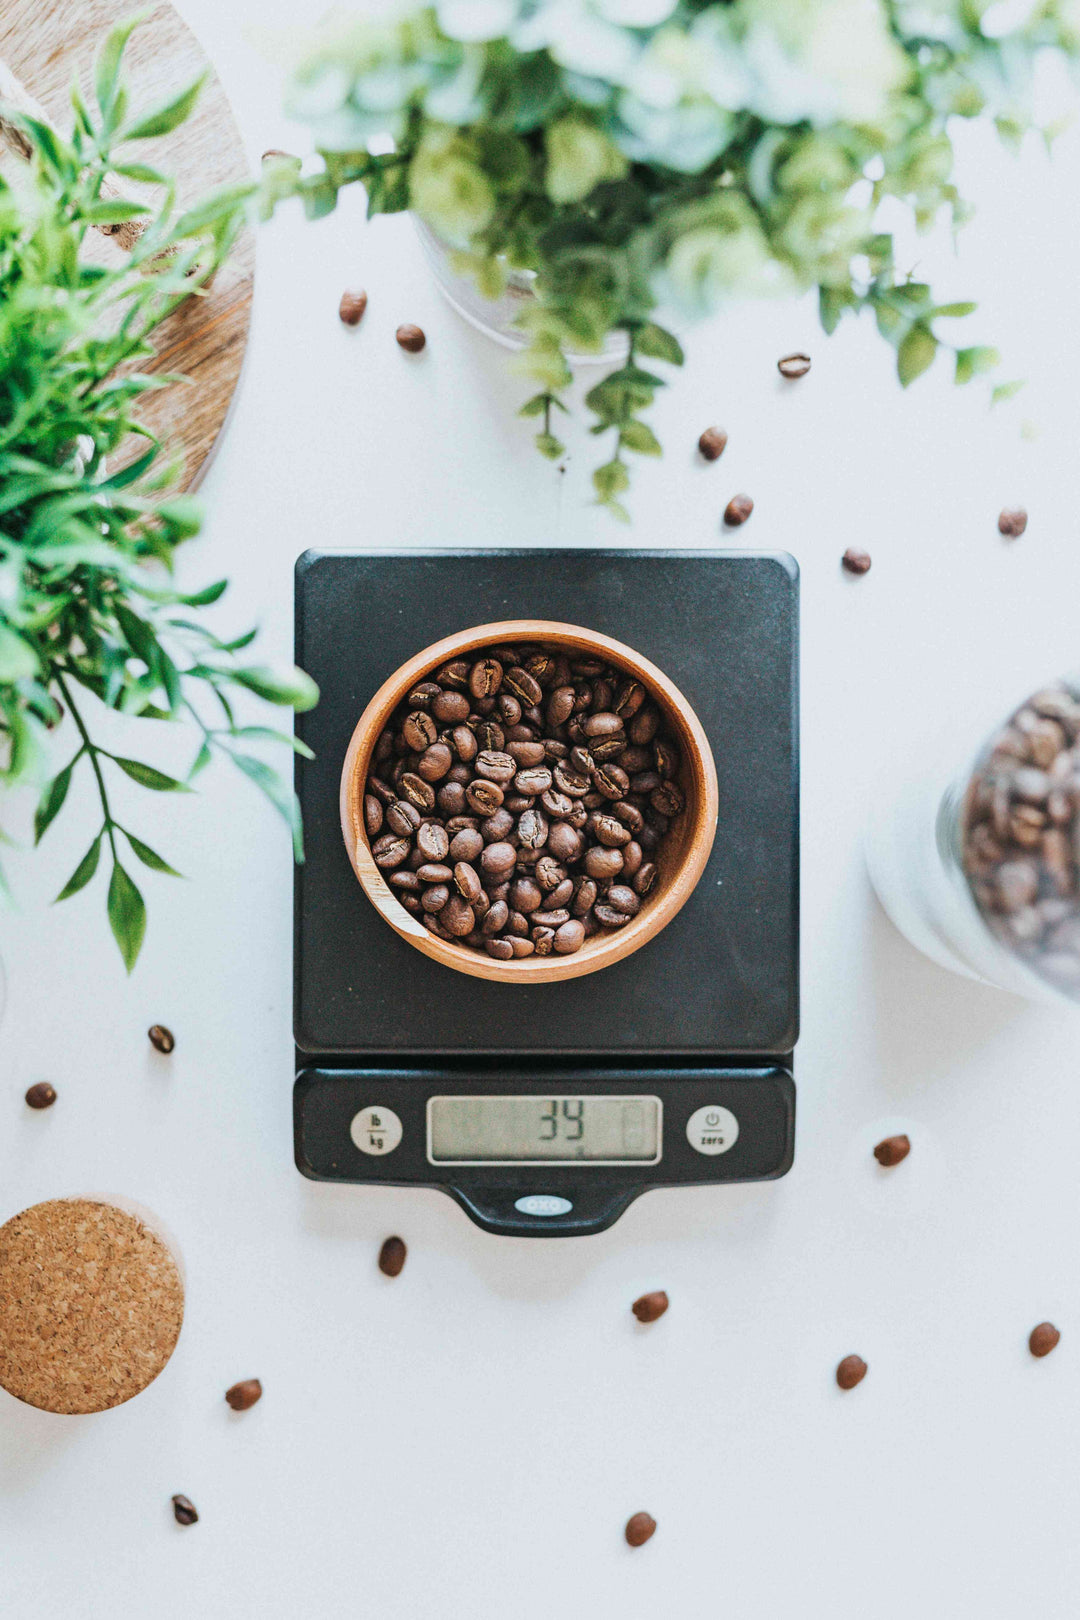 WHY YOU NEED TO GET A PAIR OF COFFEE WEIGHING SCALES